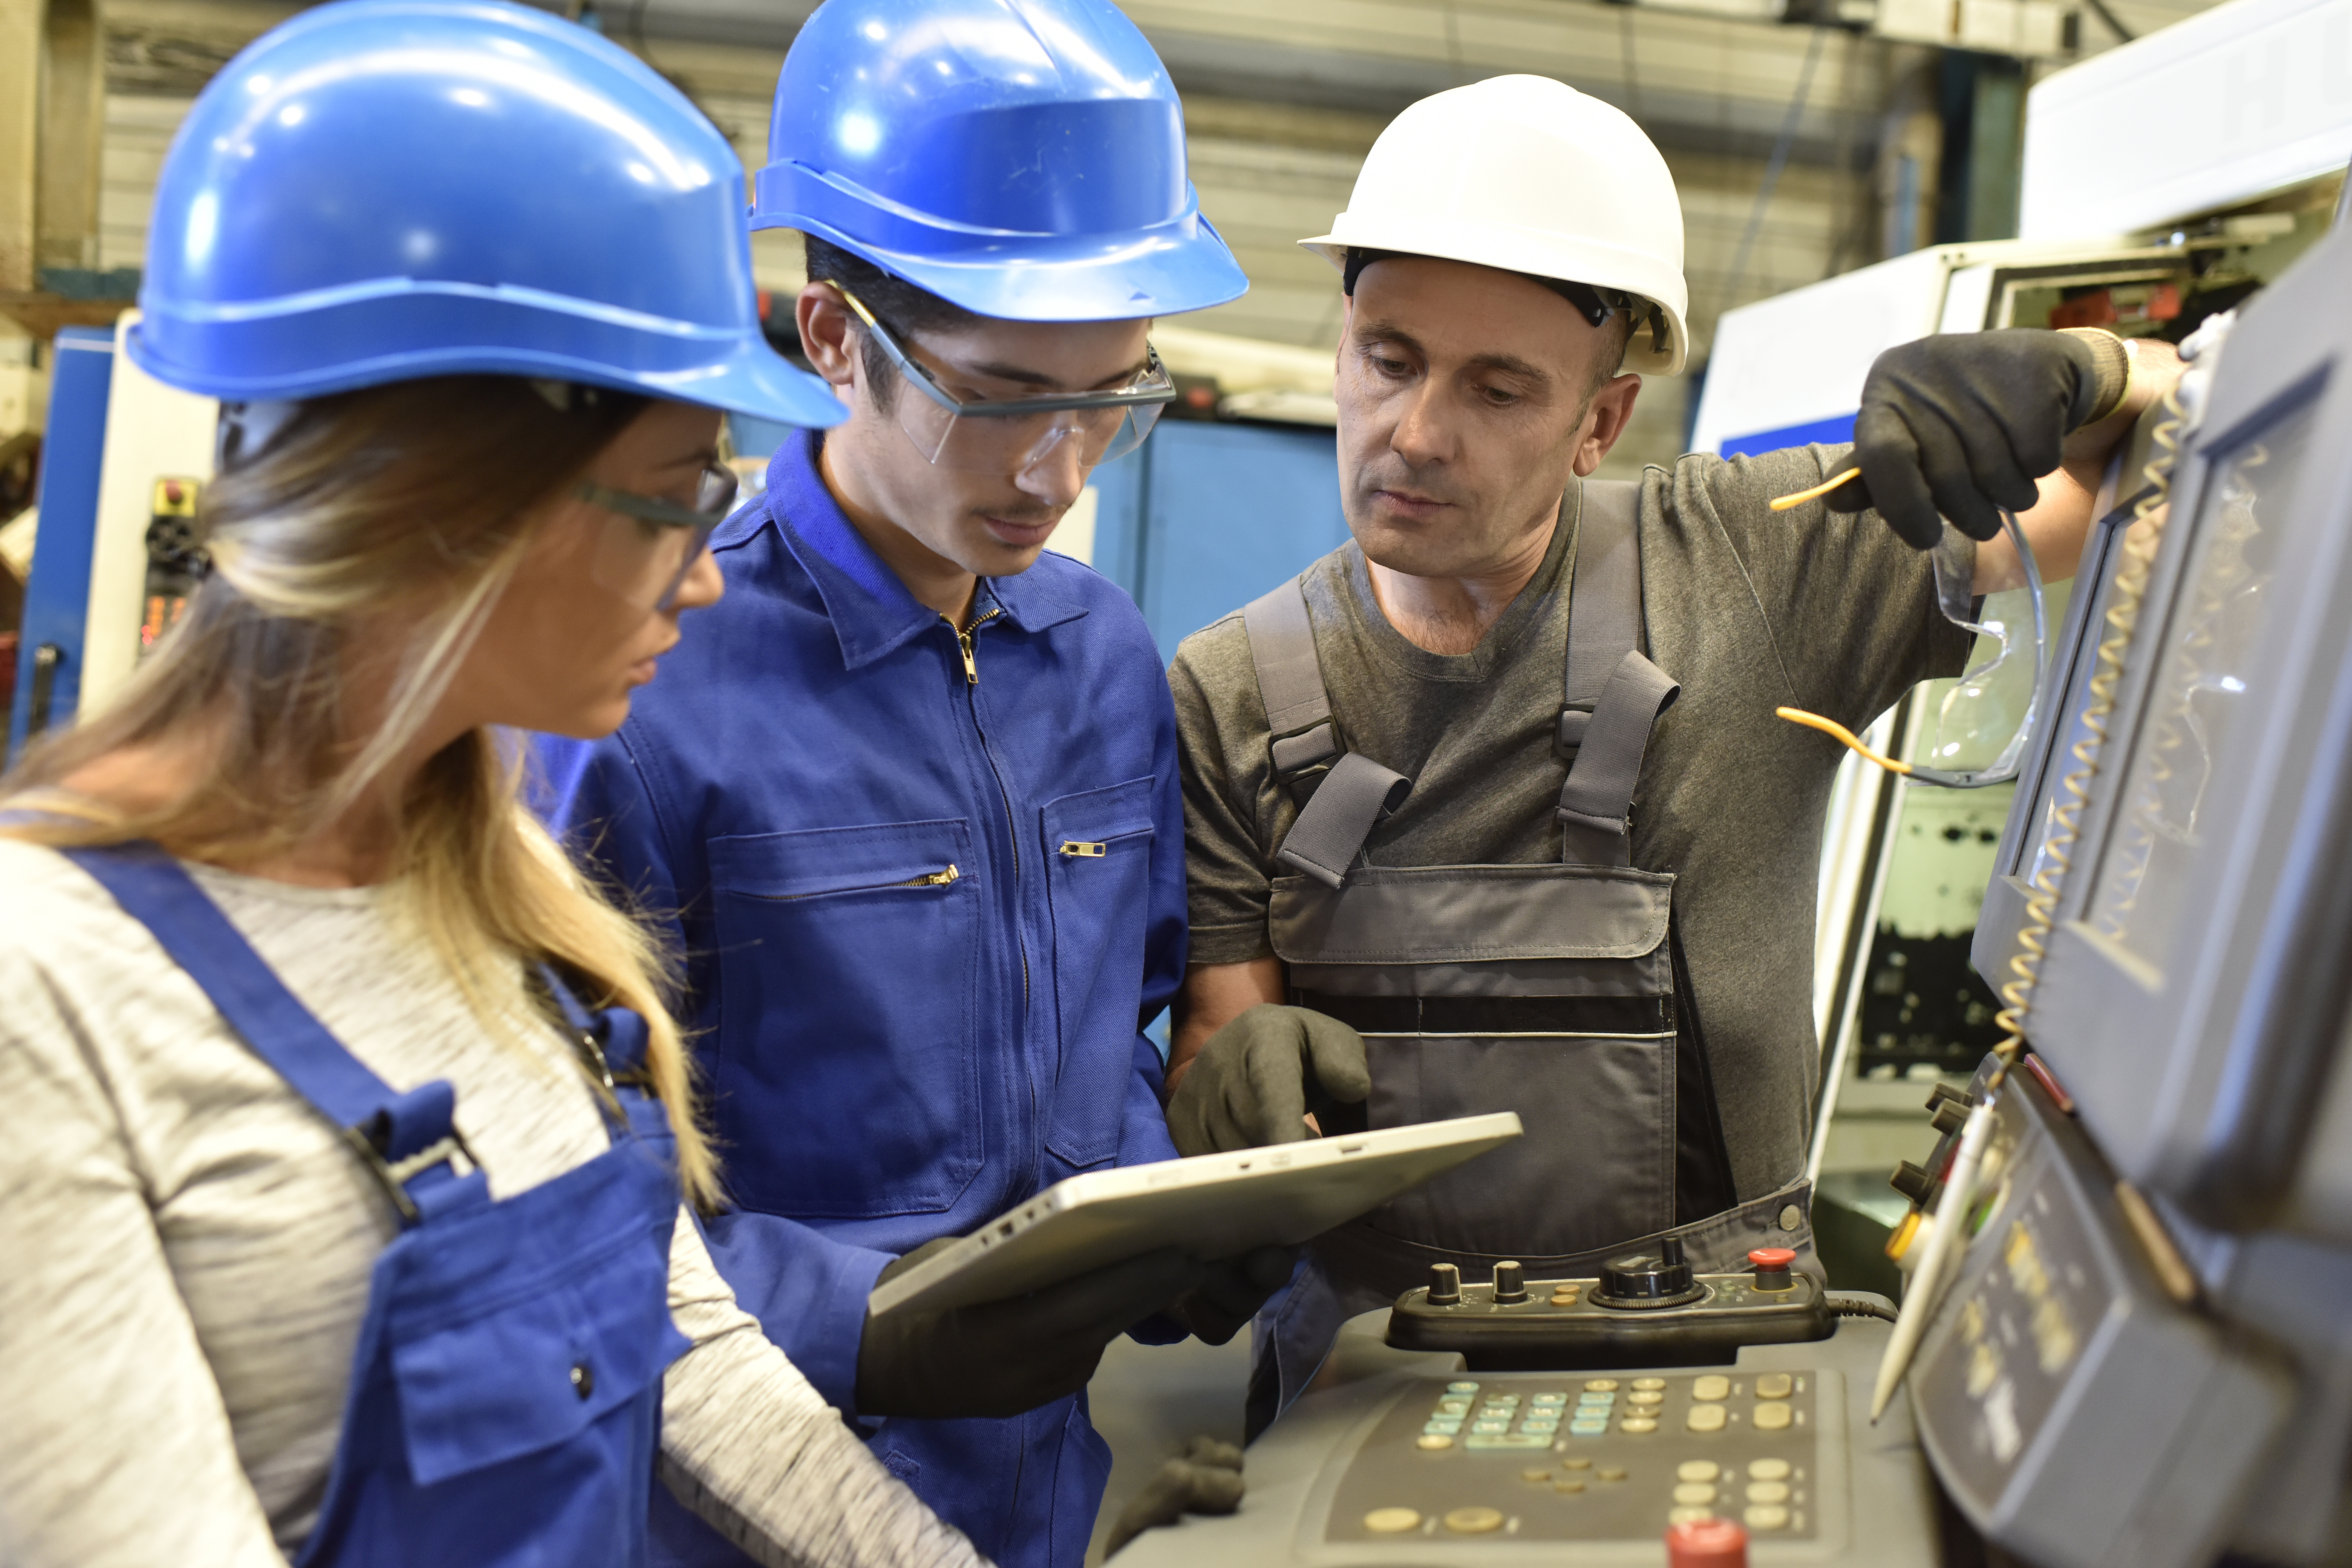 Study on Connected Work in the Manufacturing Industry